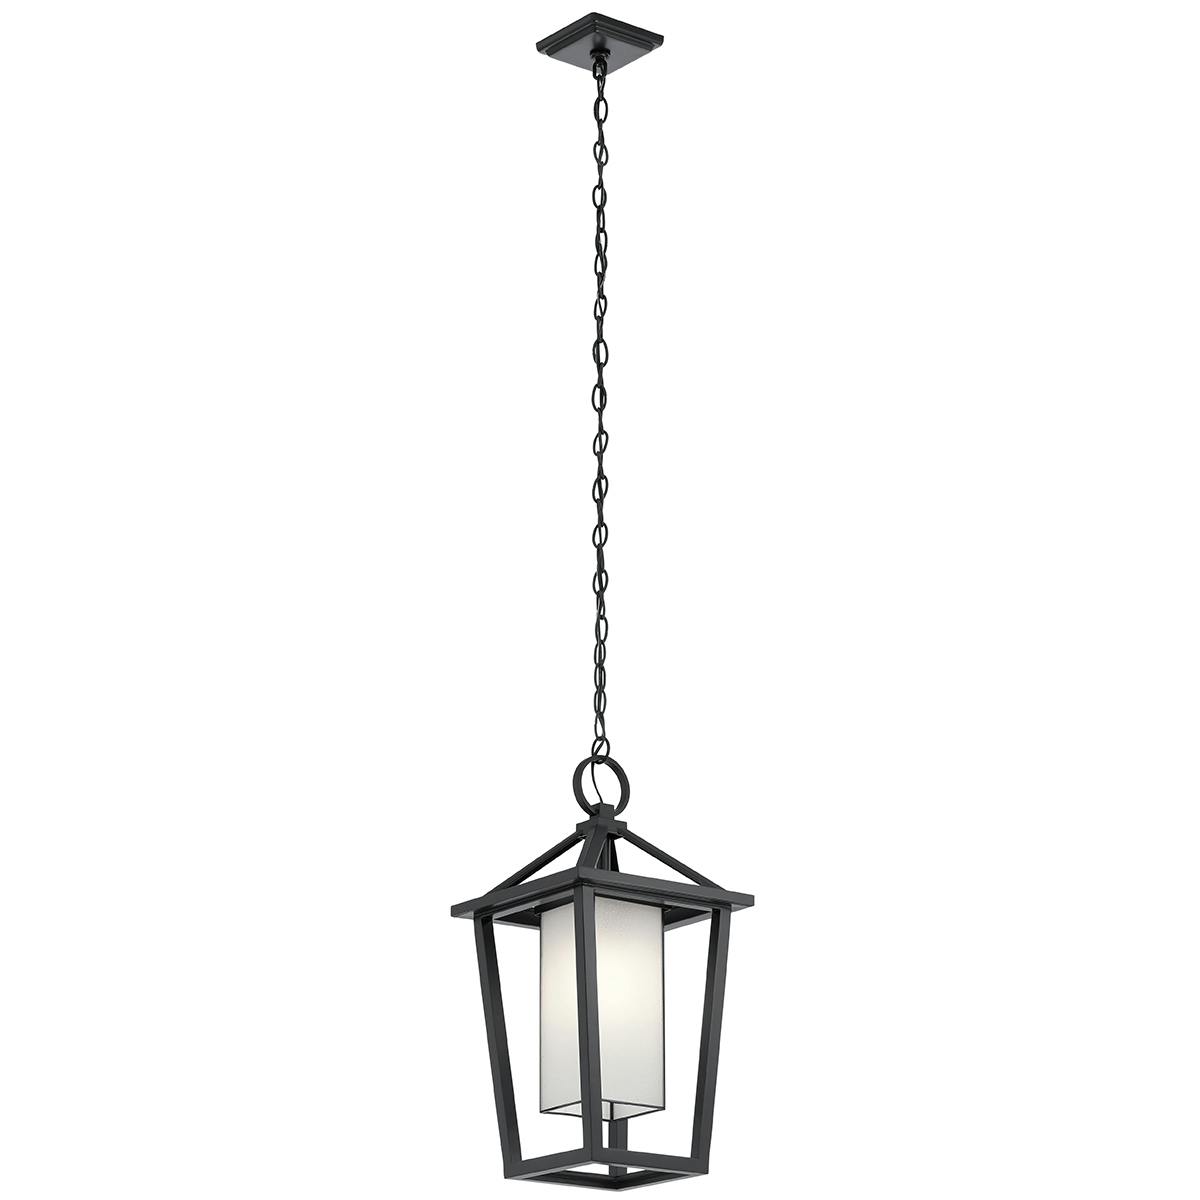 Pai™24" 1 Light Pendant in Black on a white background